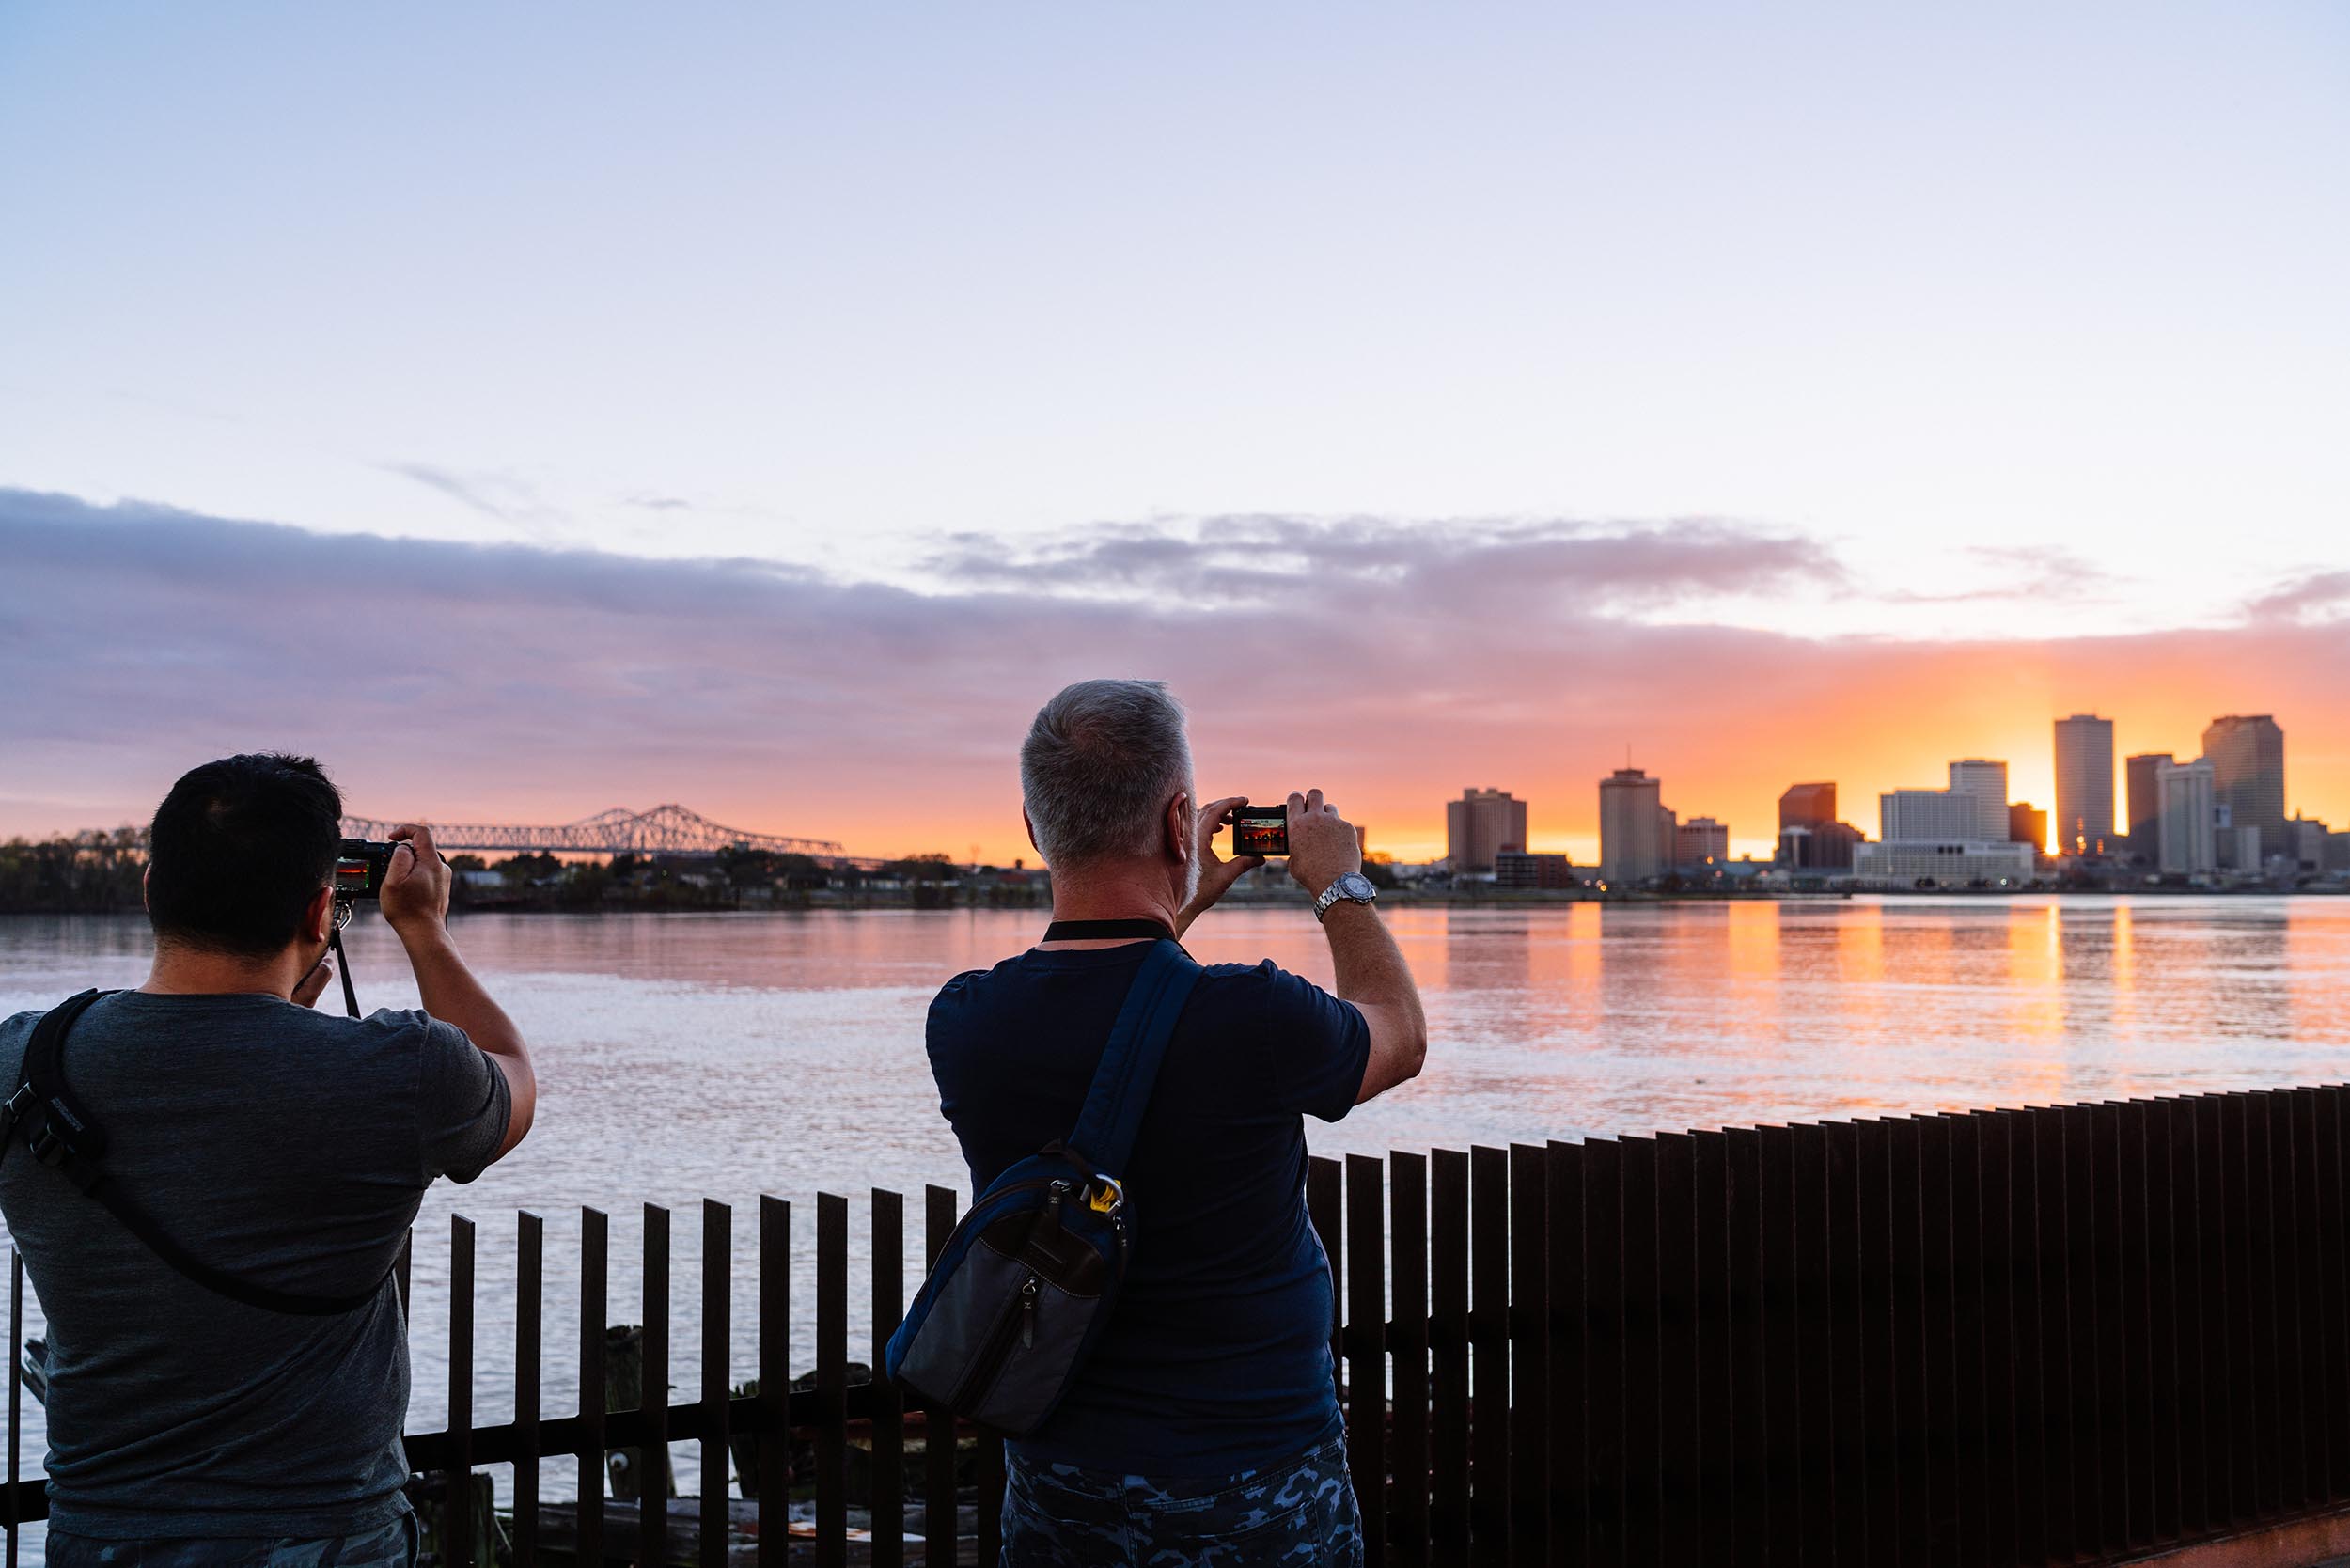 Two men in Crescent Park take photos of the New Orleans skyline across the water as the sun sets.